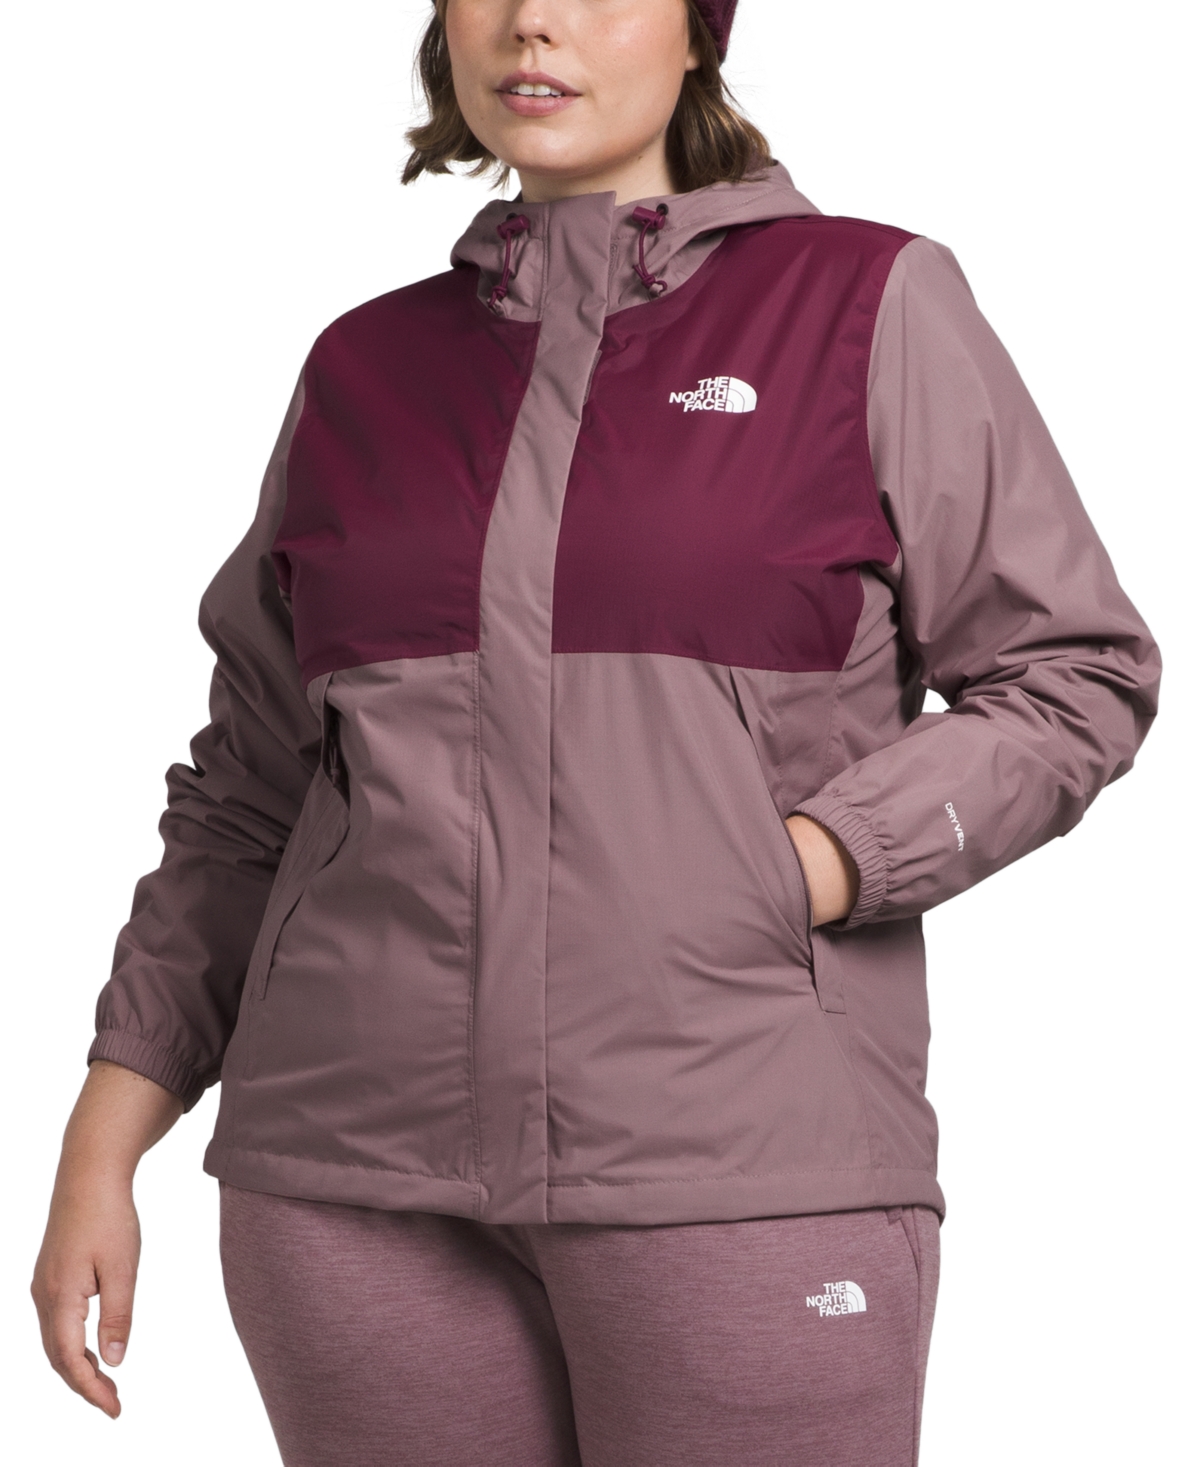 THE NORTH FACE WOMEN'S PLUS SIZE ANTORA JACKET